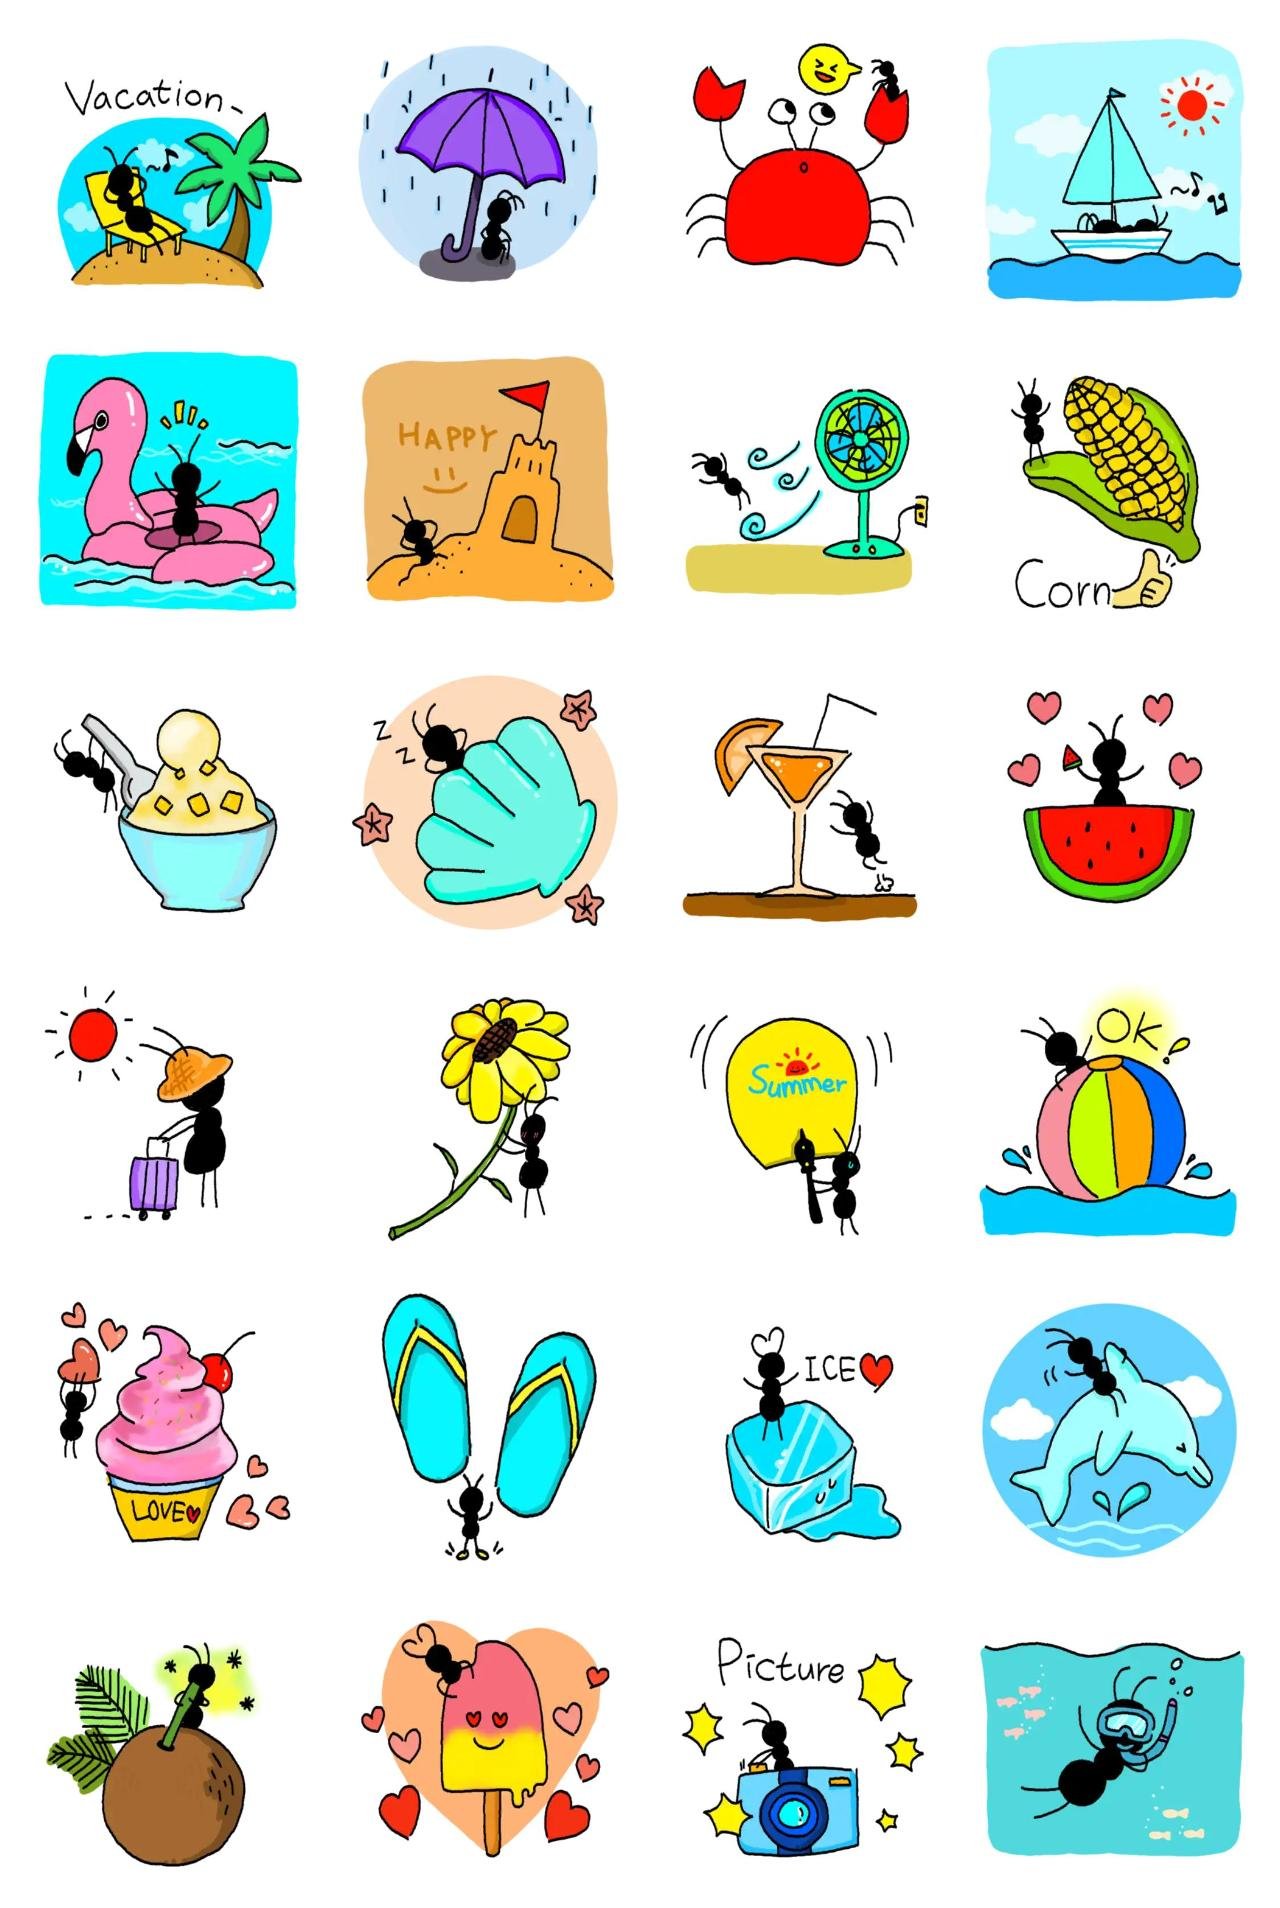 Worker ant2 Etc. sticker pack for Whatsapp, Telegram, Signal, and others chatting and message apps